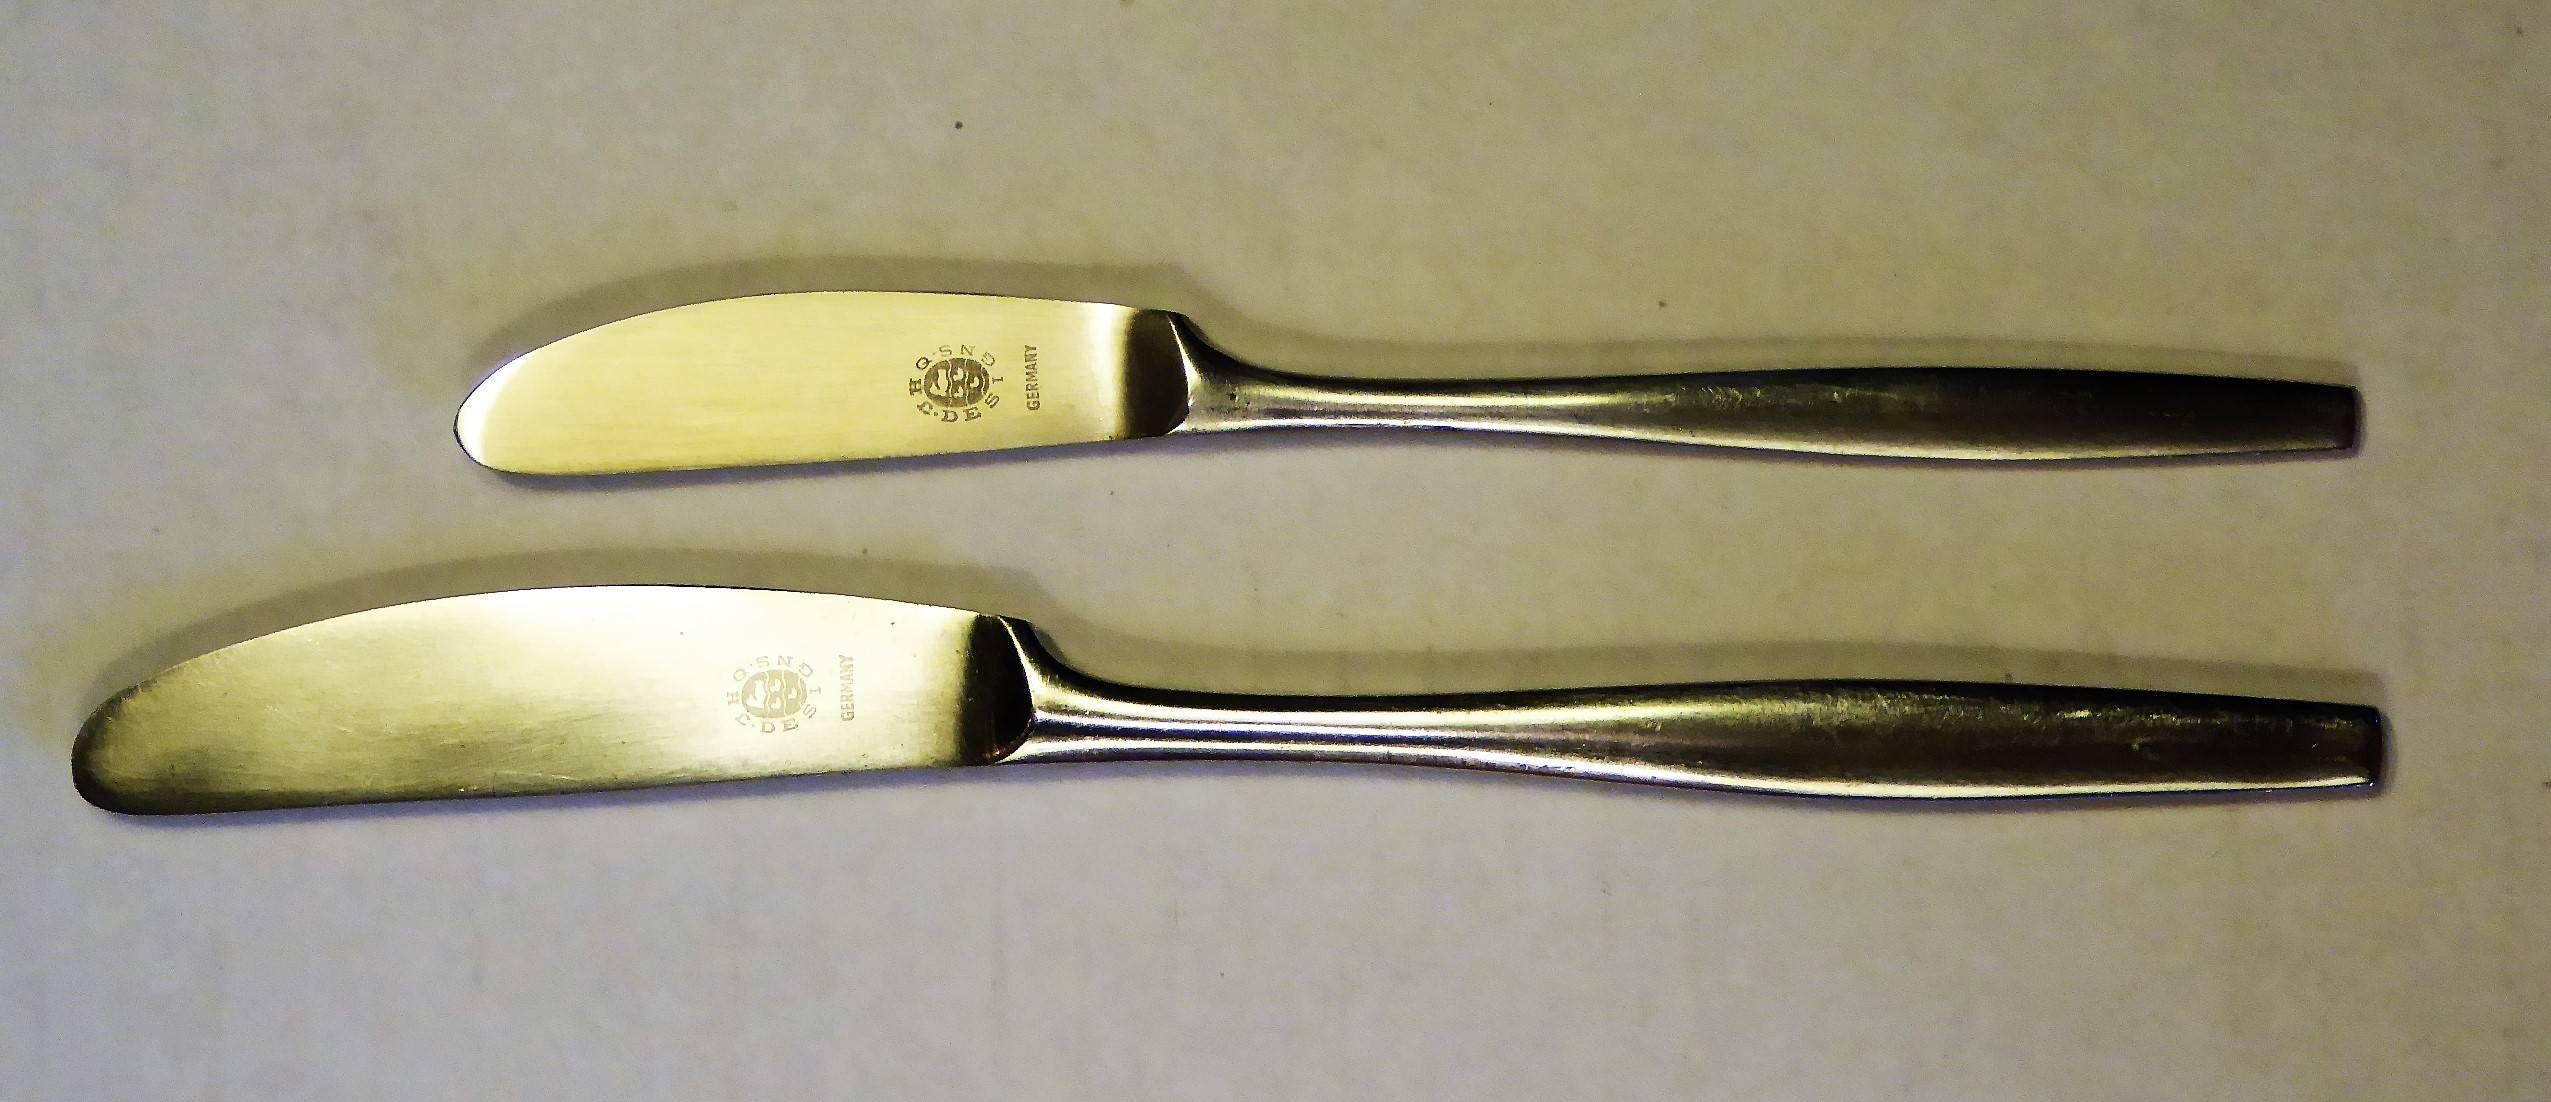 Mid-20th Century Early Jens Quistgaard Dansk Variation V Flatware for 12 Plus Extras 105 Pieces